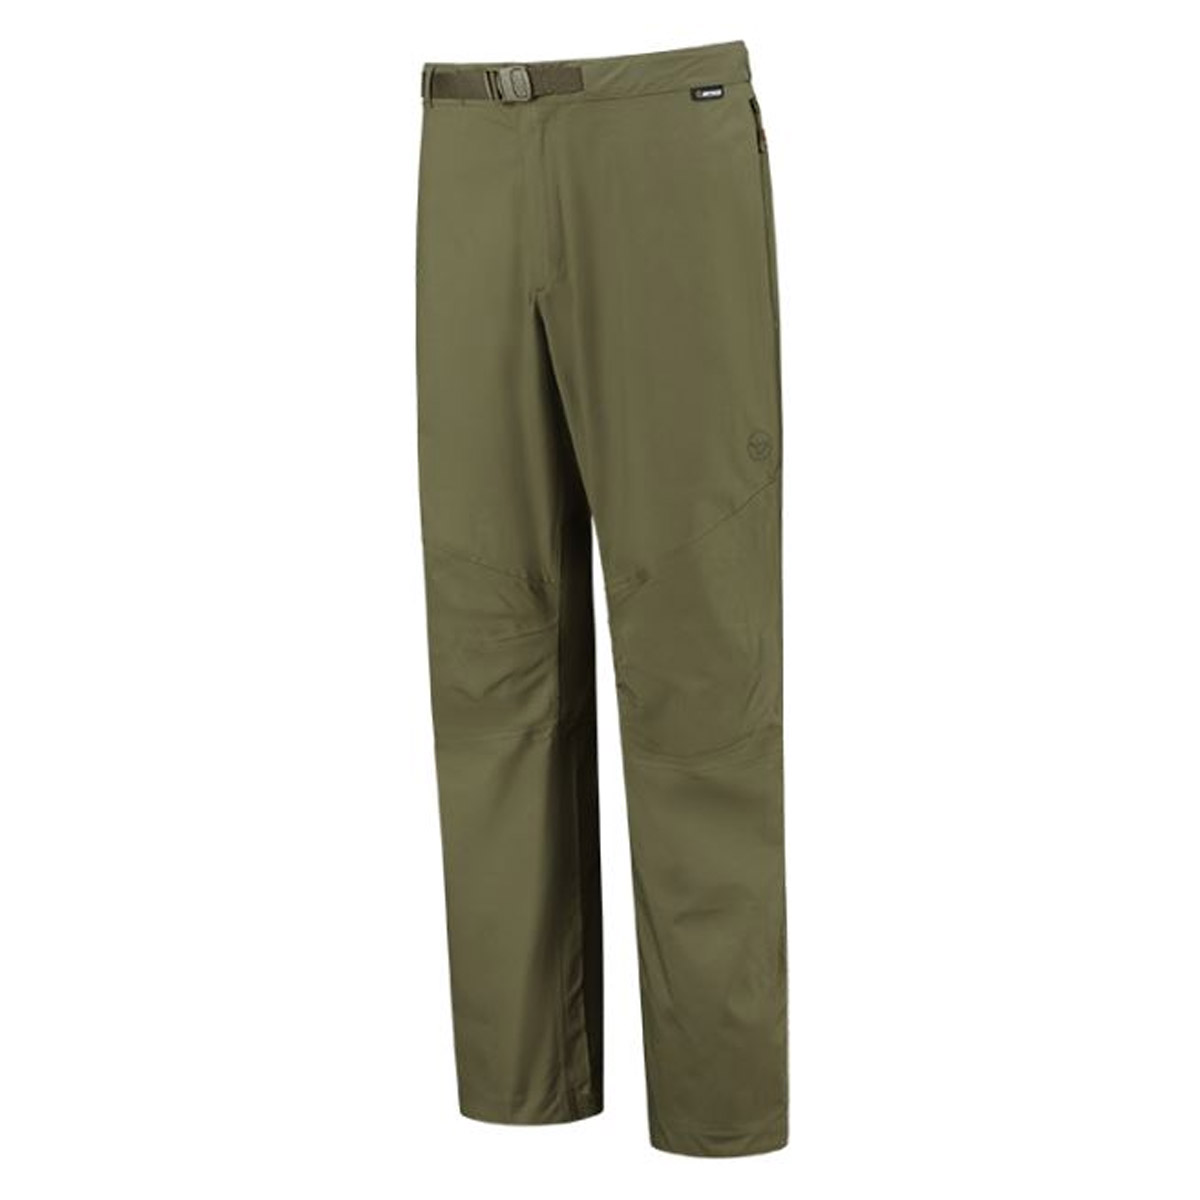 Korda Kore Drykore Over Trousers Olive 